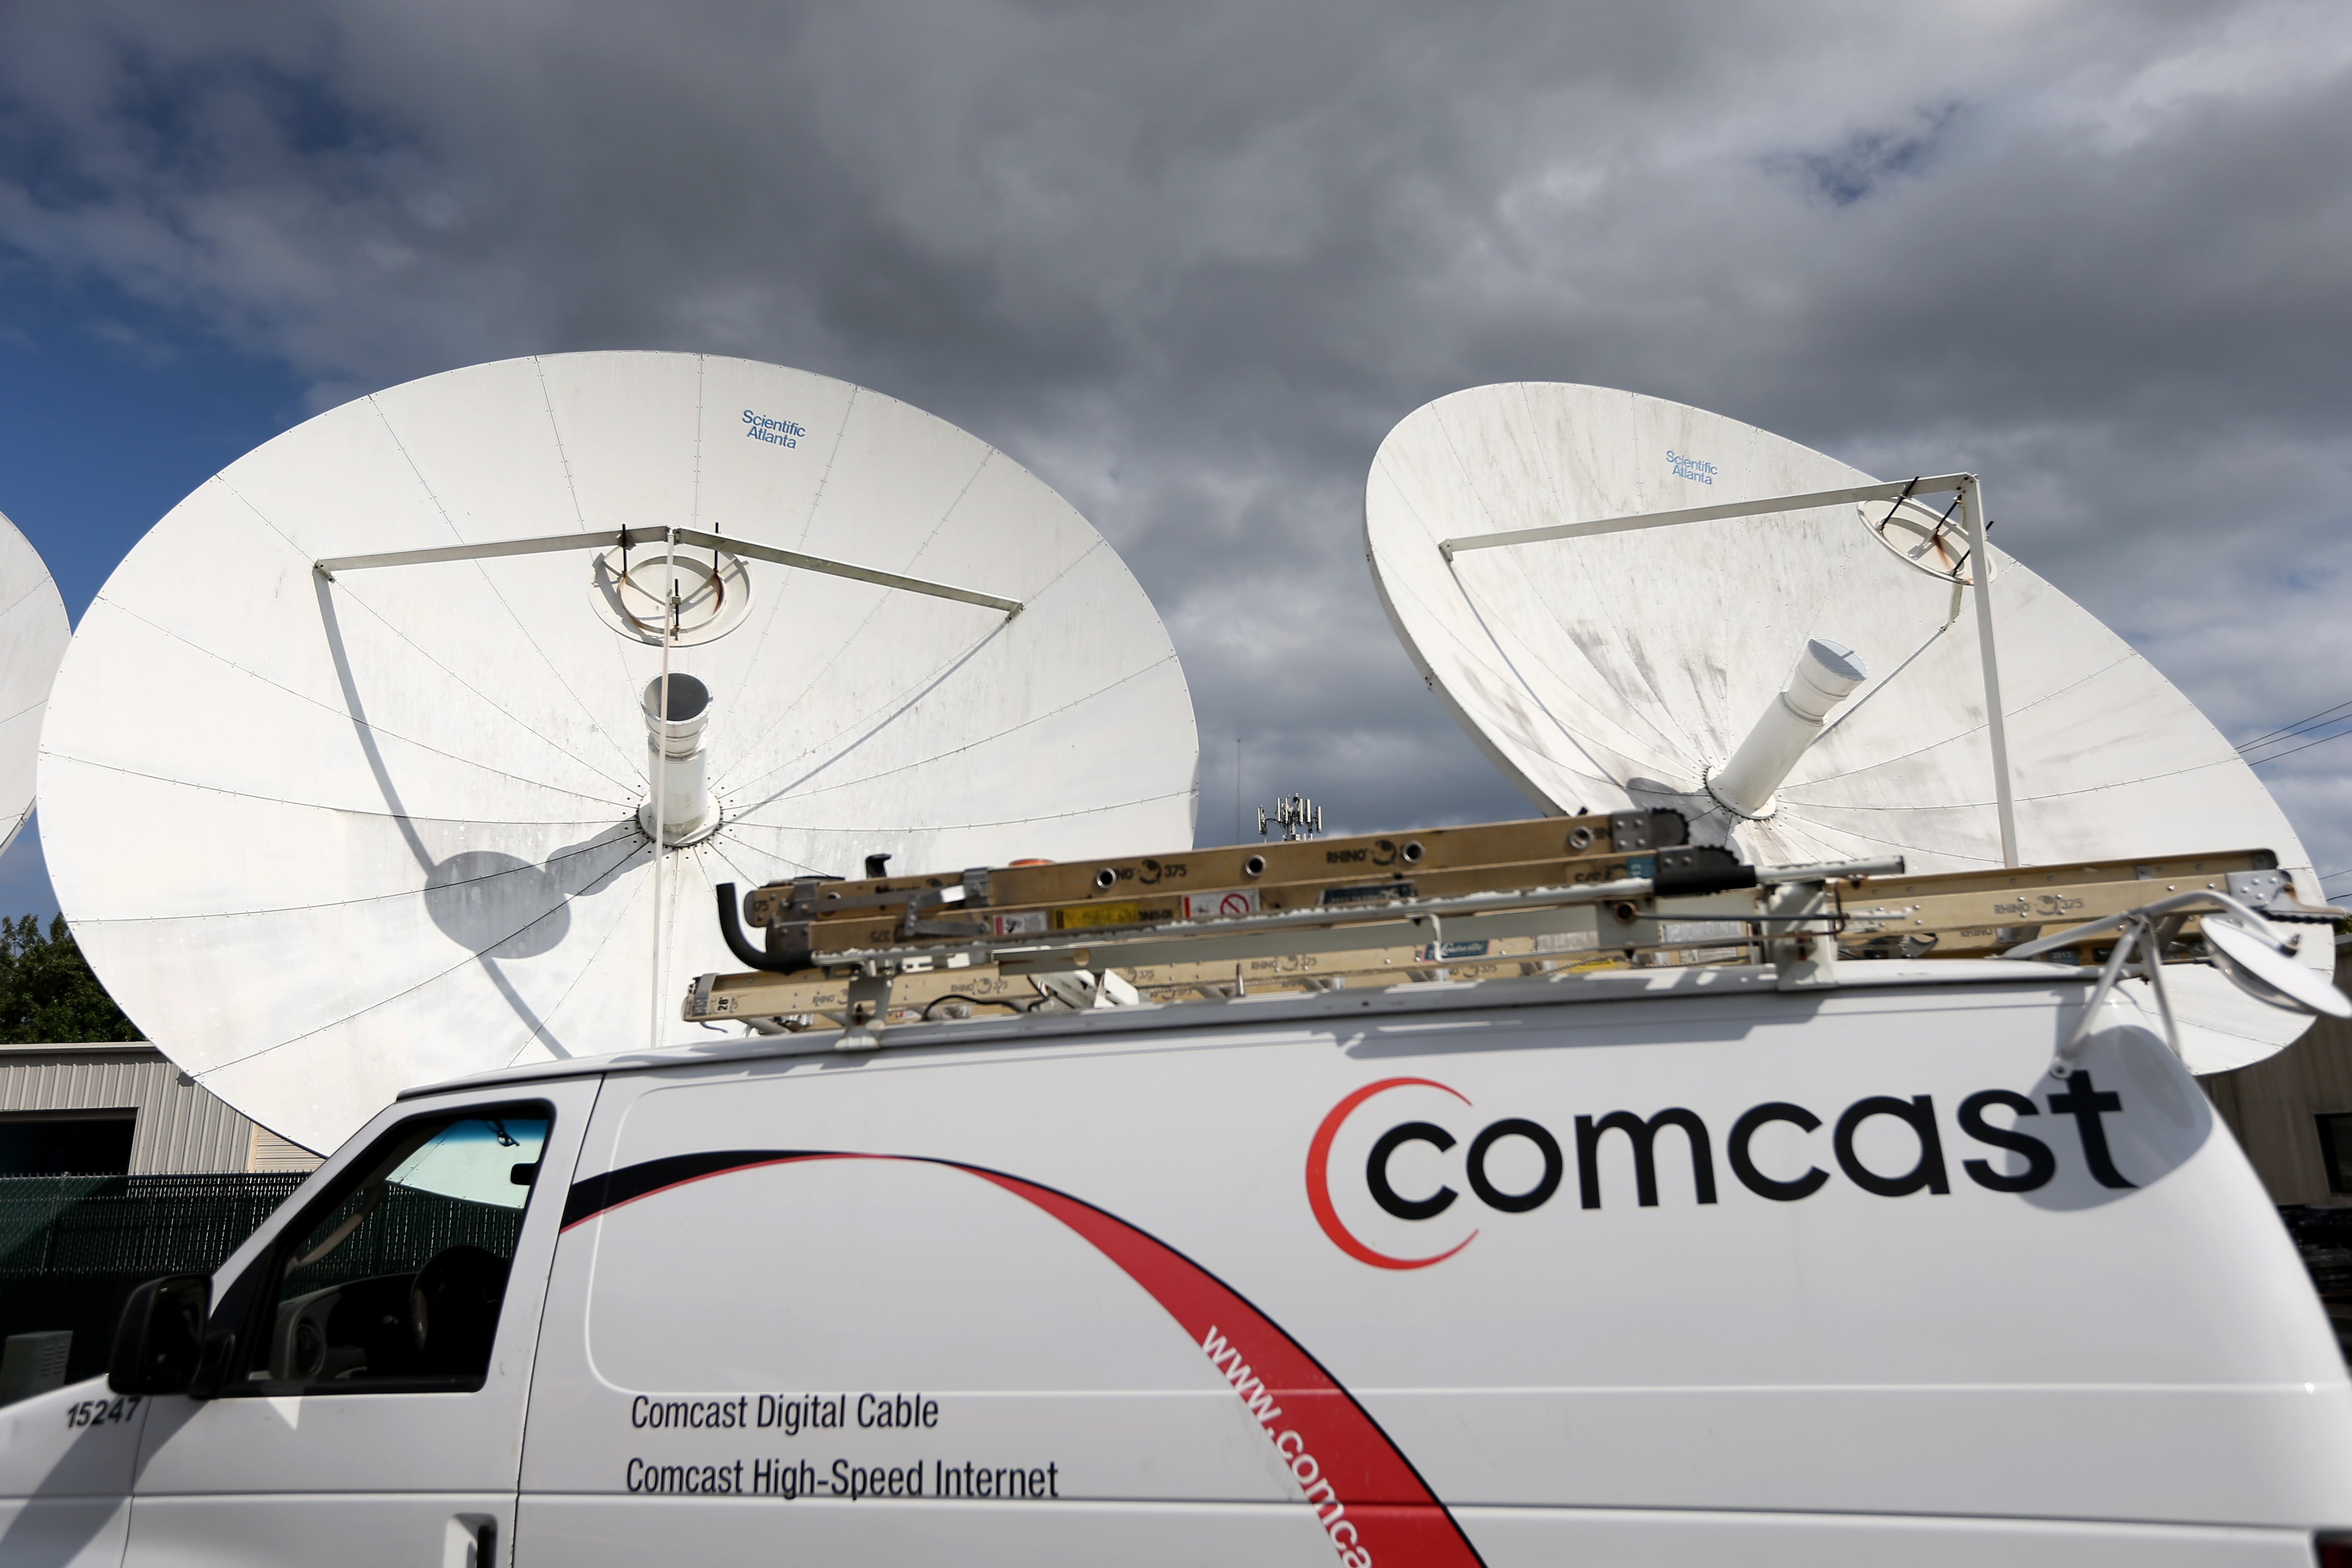 Cable Giant Comcast To Acquire Time Warner Cable